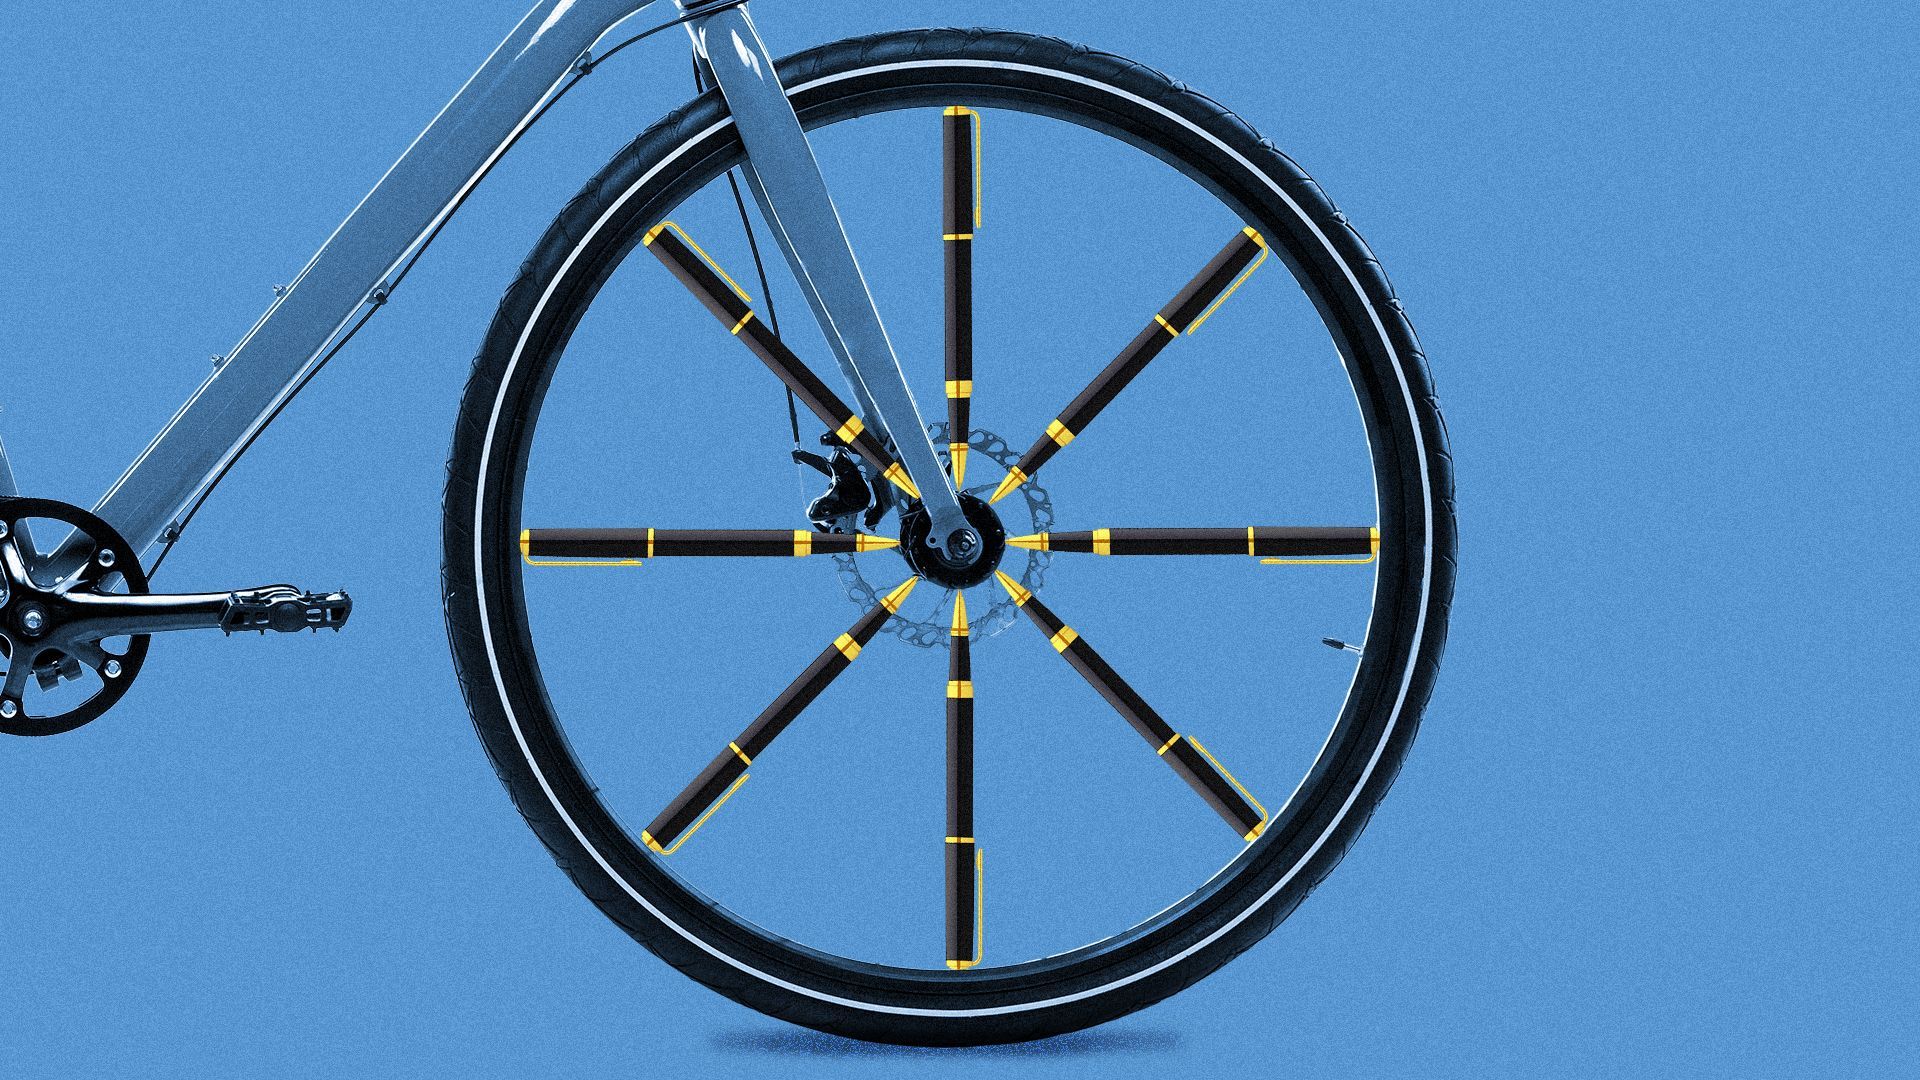 Illustration of pens replacing the spokes of a bicycle wheel.